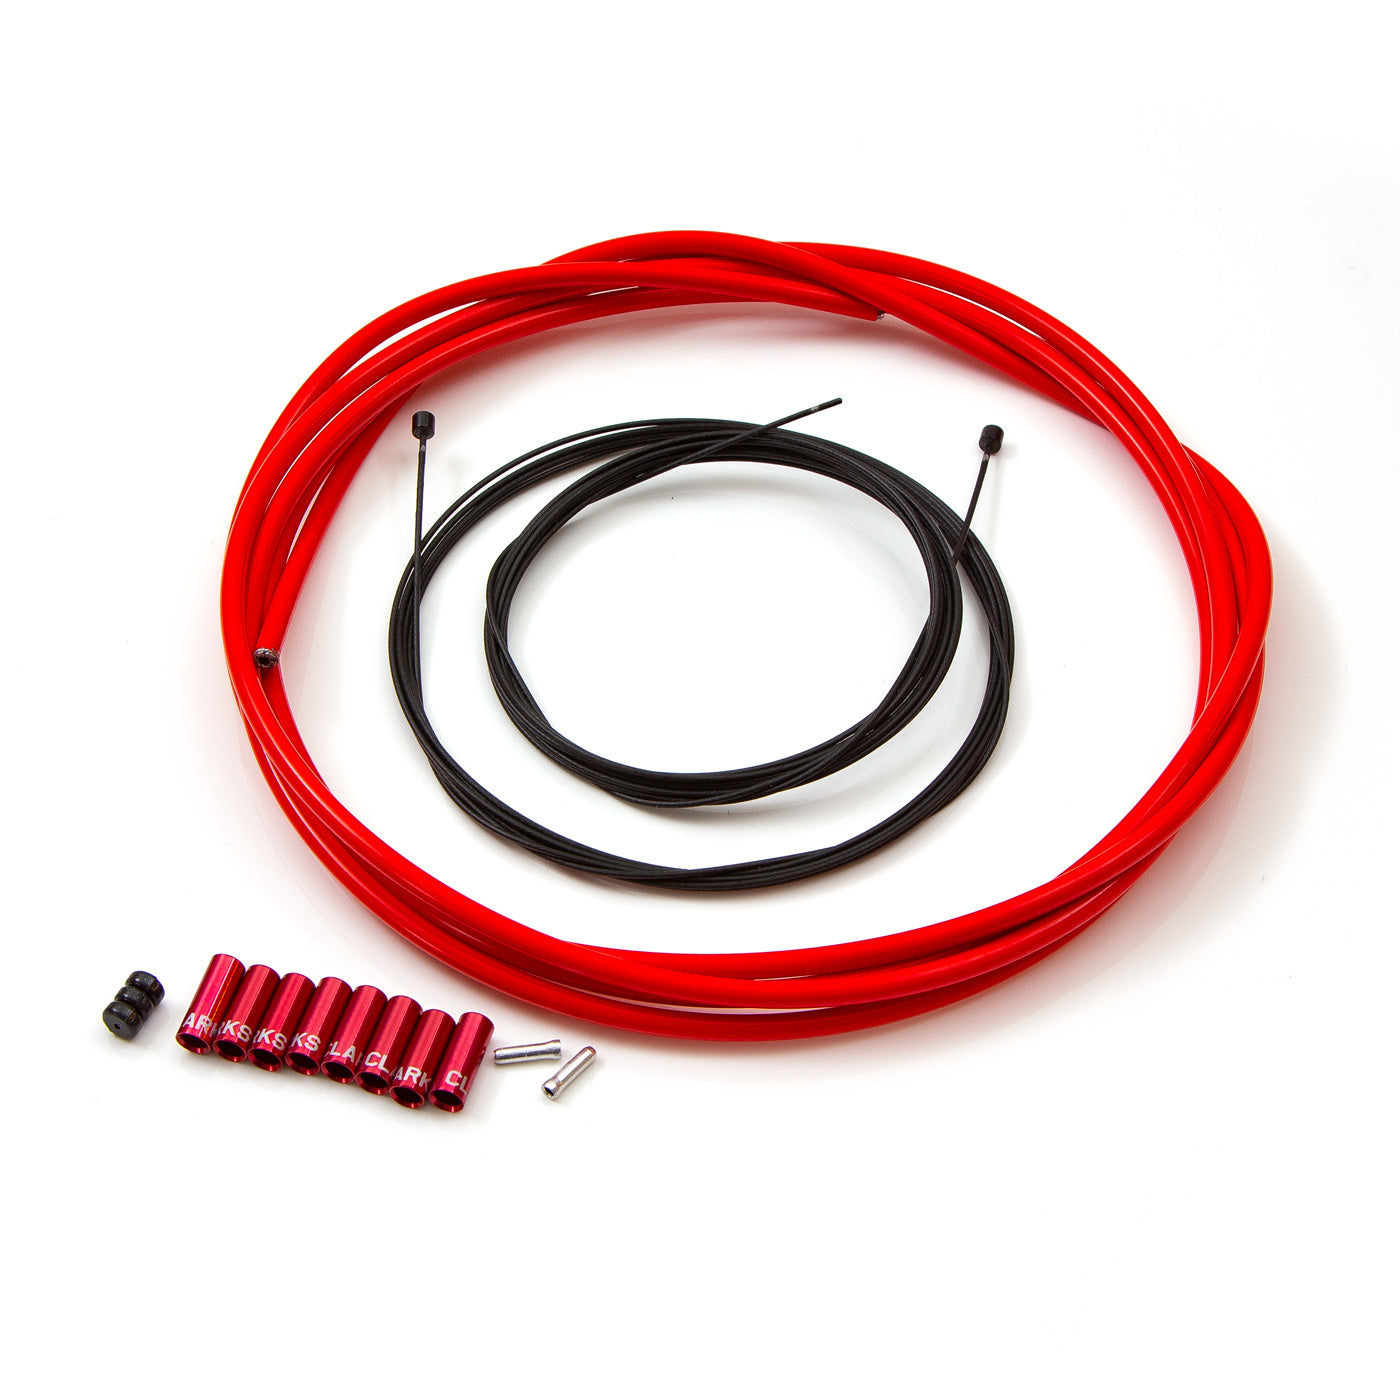 View Clarks Lightweight Alloy Housing Gear Cable Kit Red information